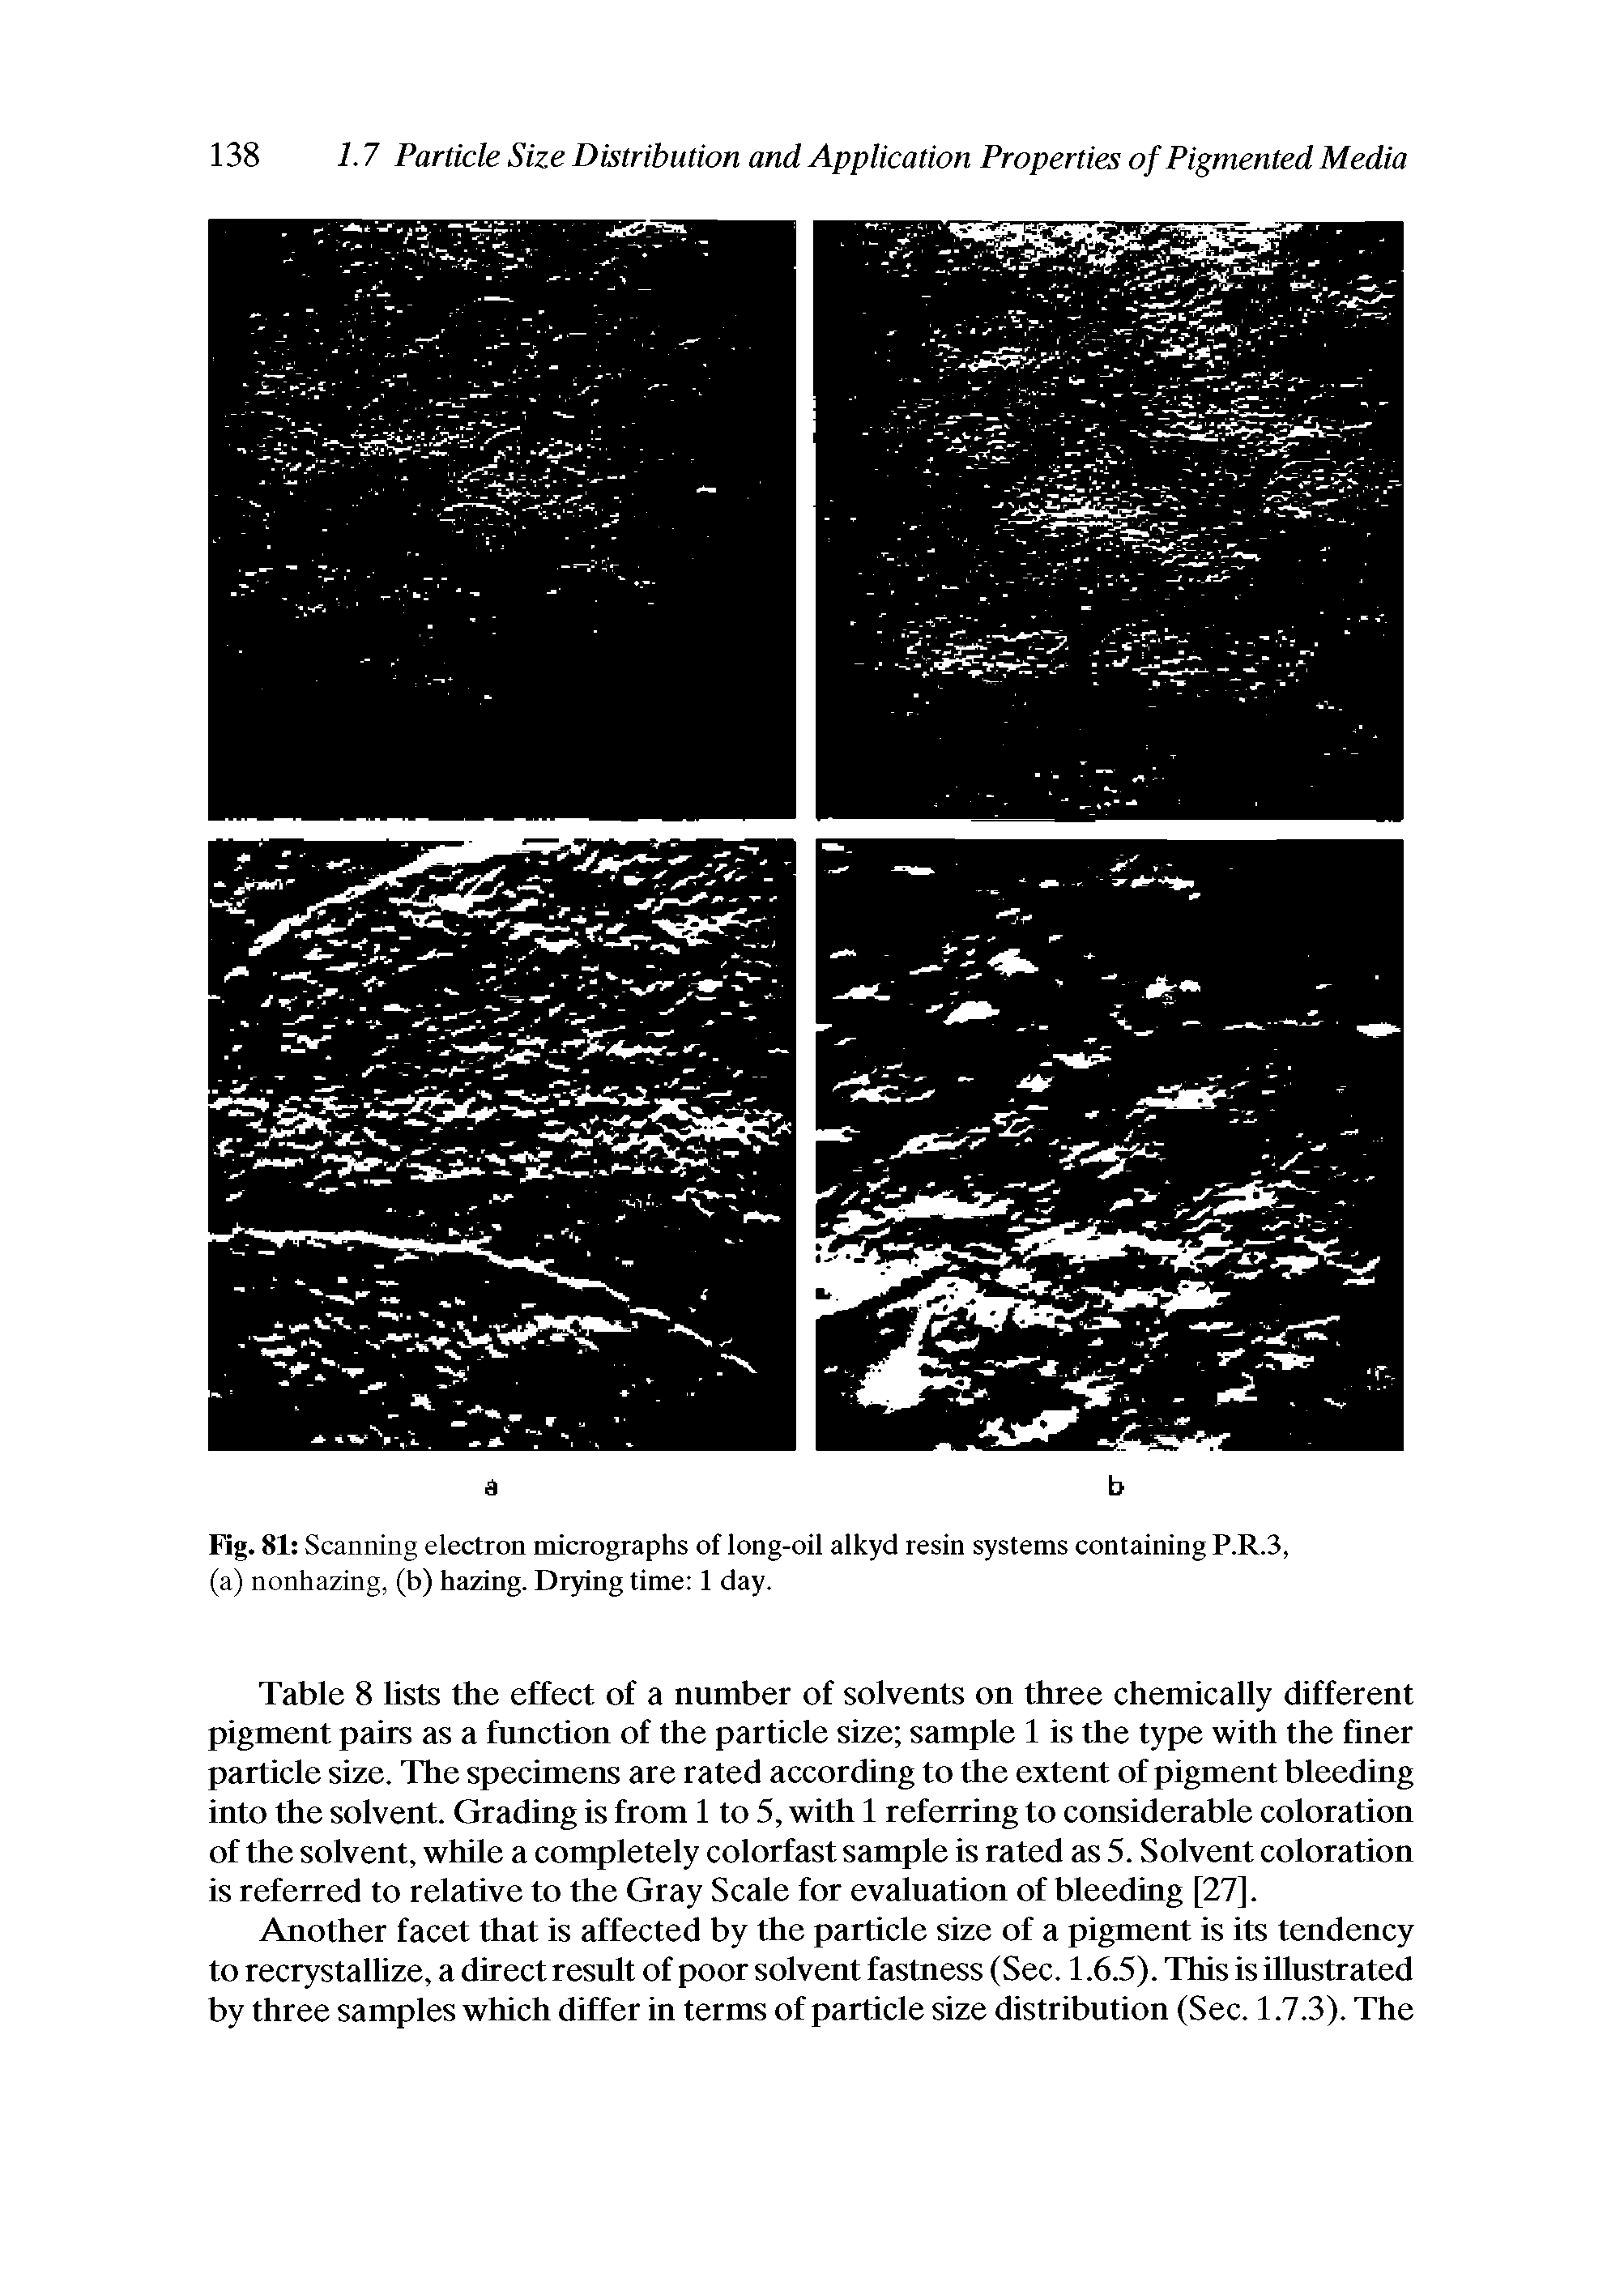 Fig. 81 Scanning electron micrographs of long-oil alkyd resin systems containing P.R.3, (a) nonhazing, (b) hazing. Drying time 1 day.